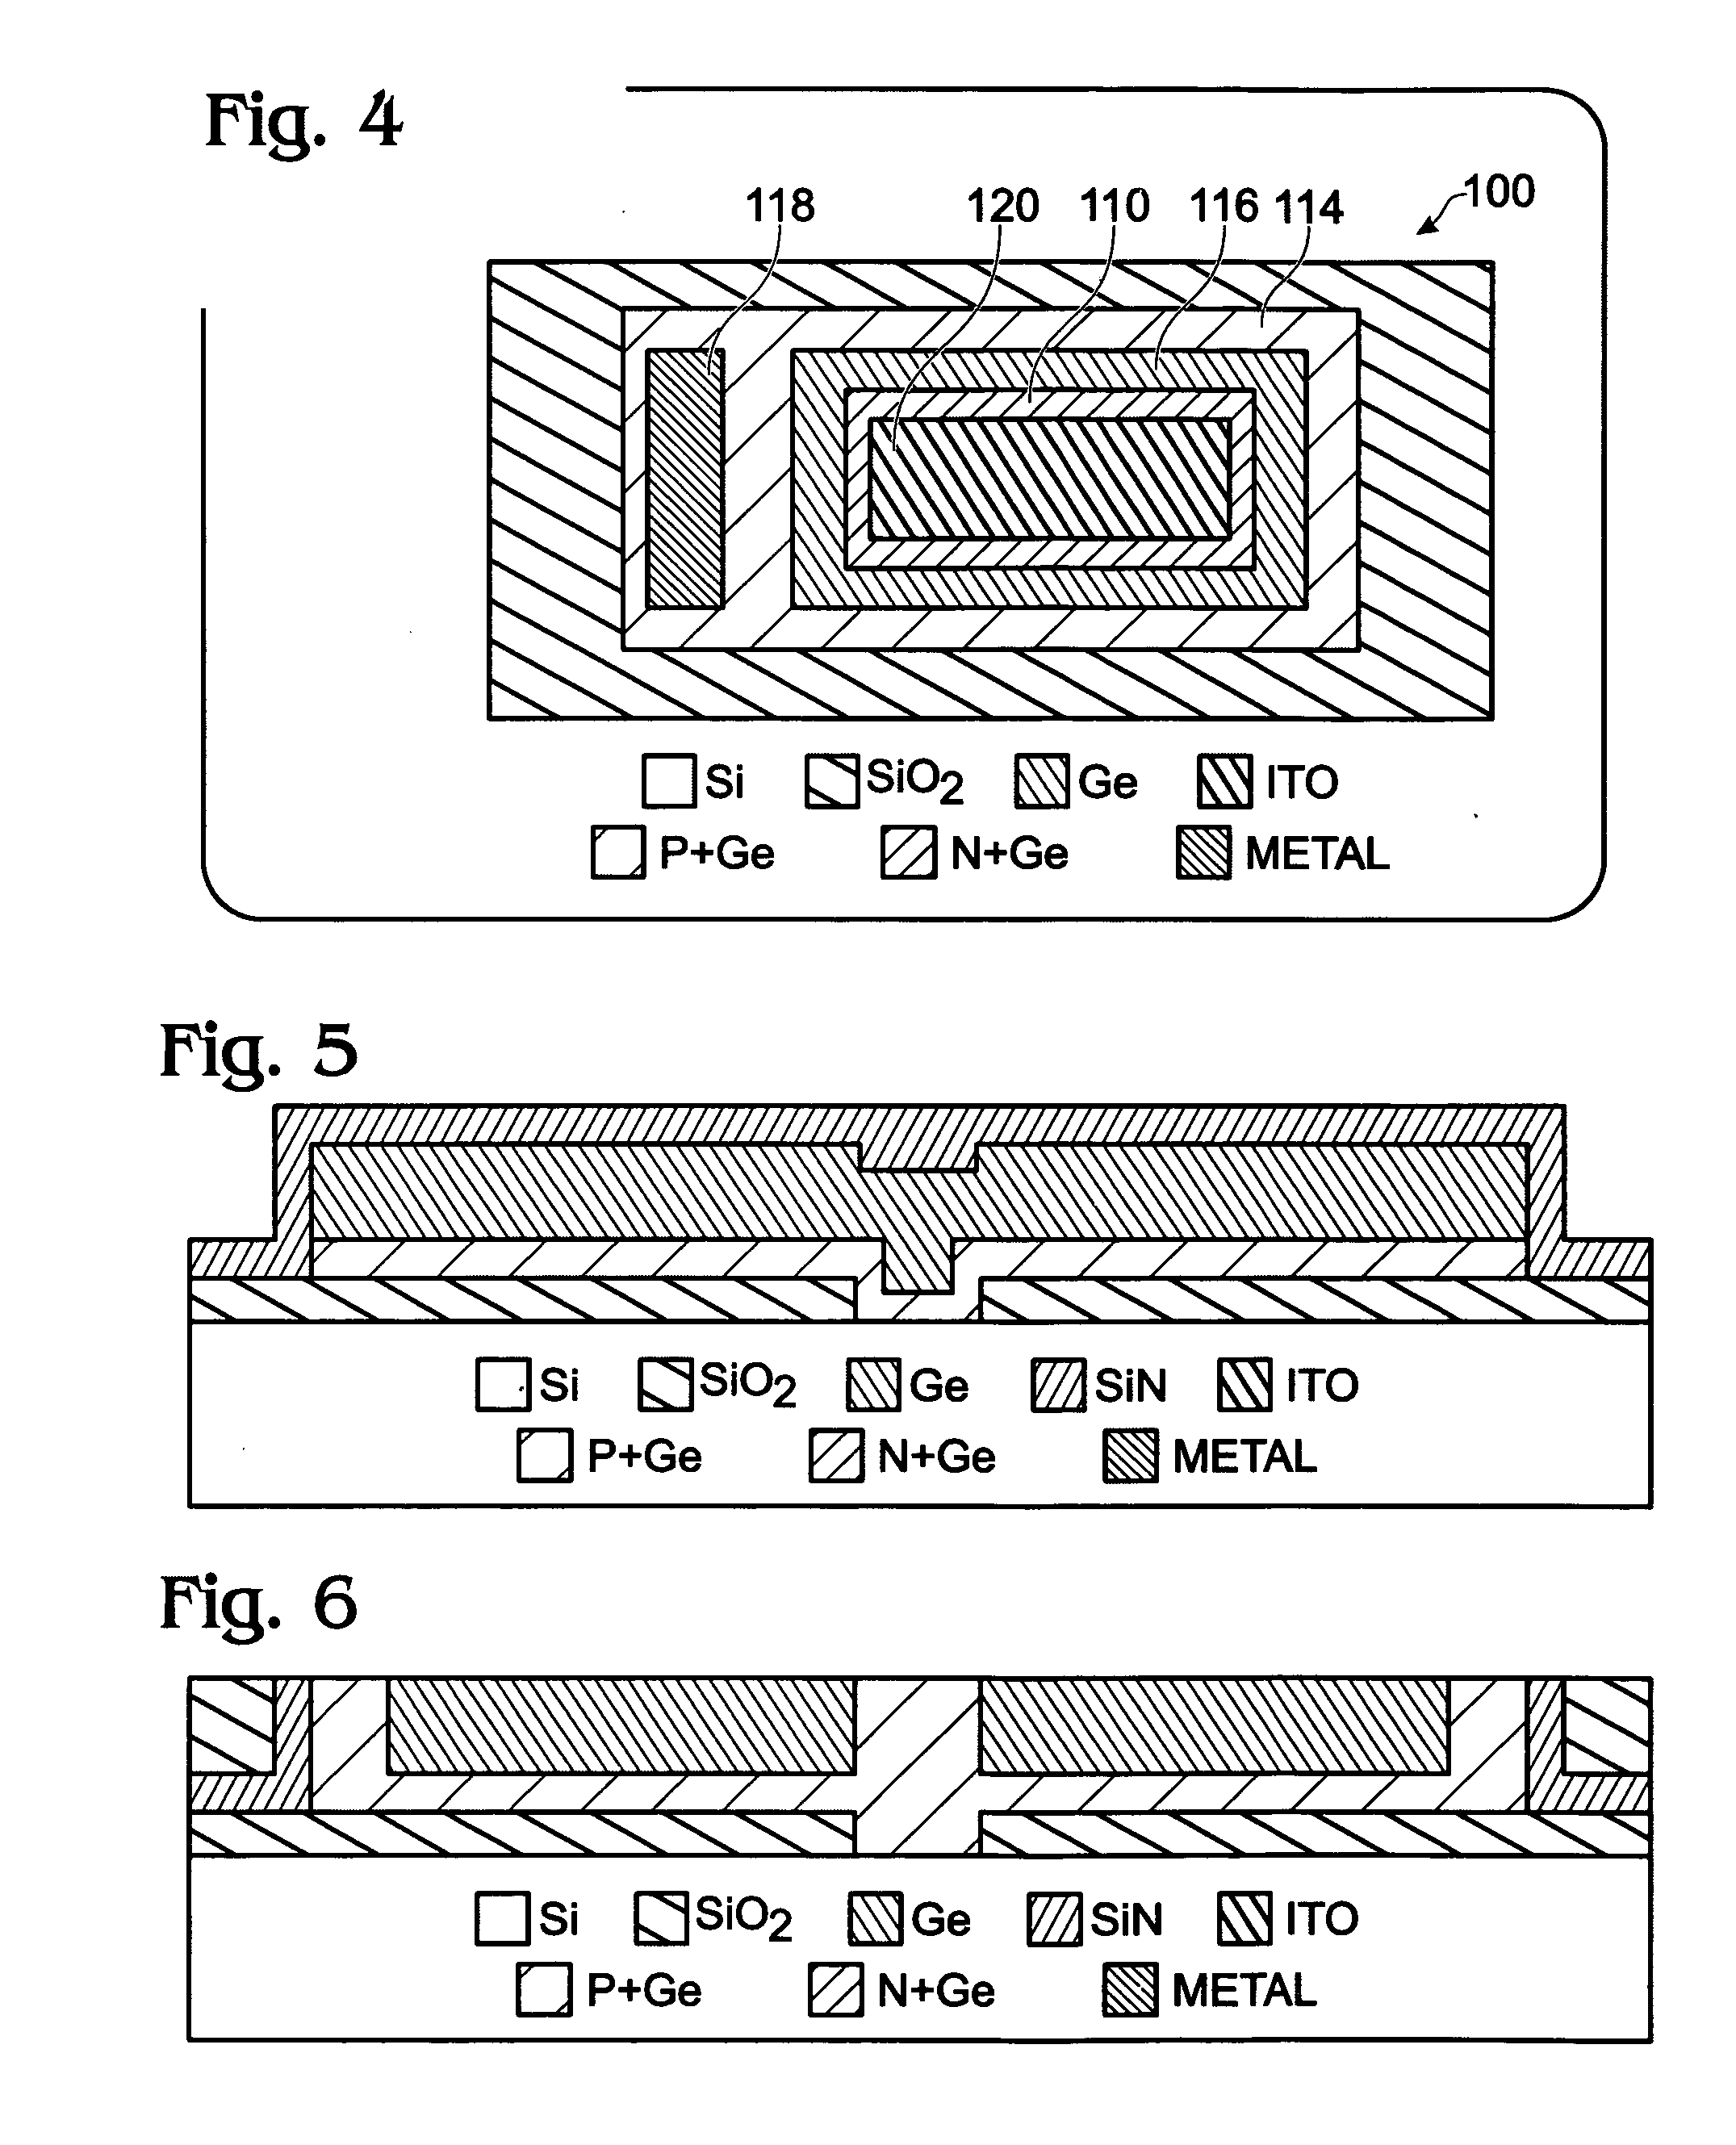 Liquid phase epitaxial GOI photodiode with buried high resistivity germanium layer